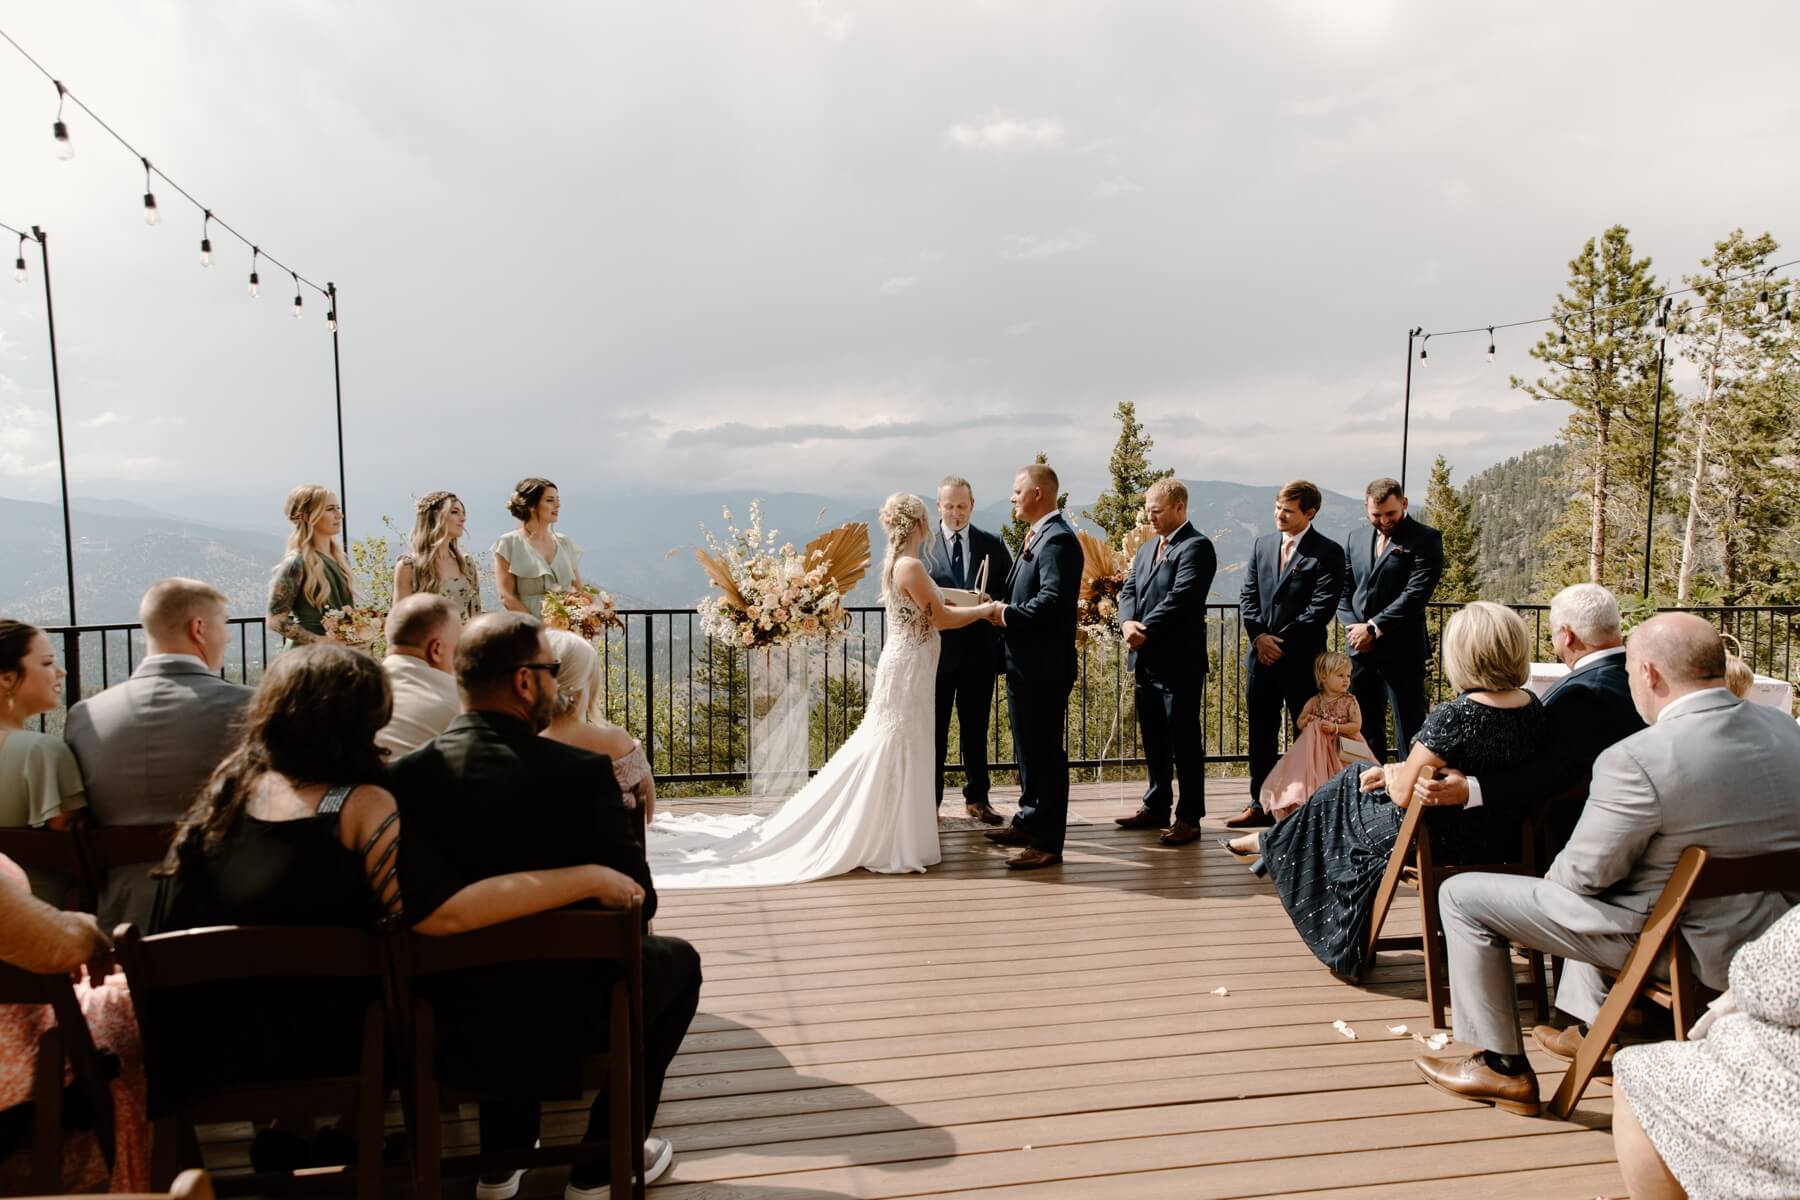 Bride and groom holding hands during wedding ceremony on deck at North Star Gatherings | McArthur Weddings and Events